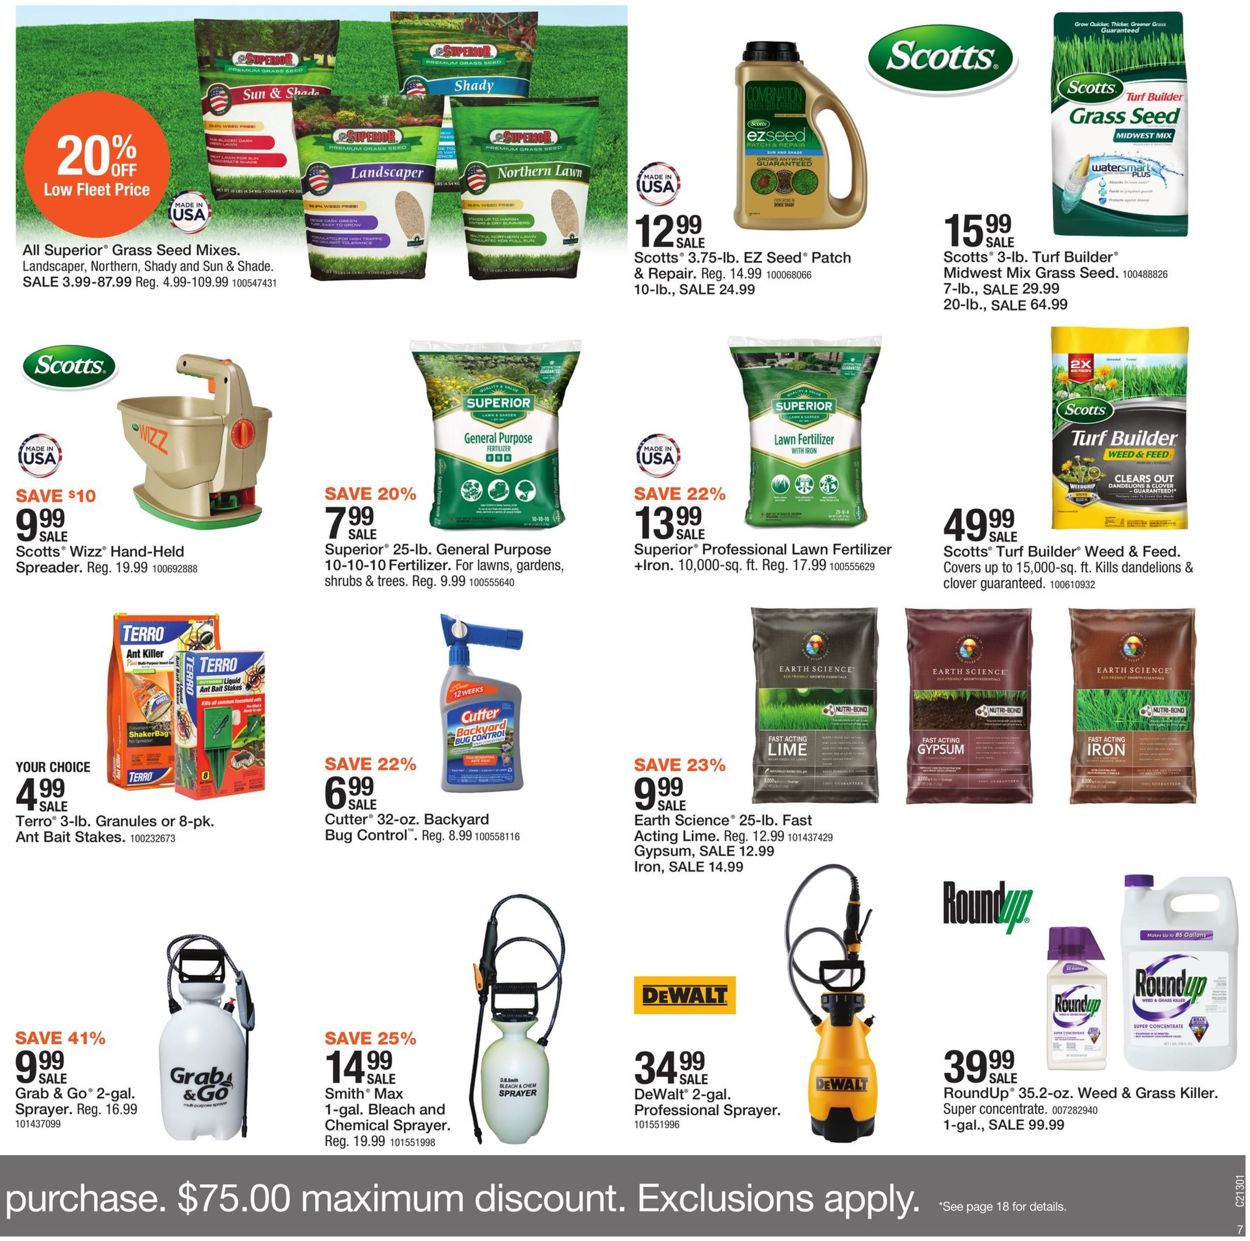 Mills Fleet Farm Current weekly ad 07/23 - 07/31/2021 [7] - frequent ...